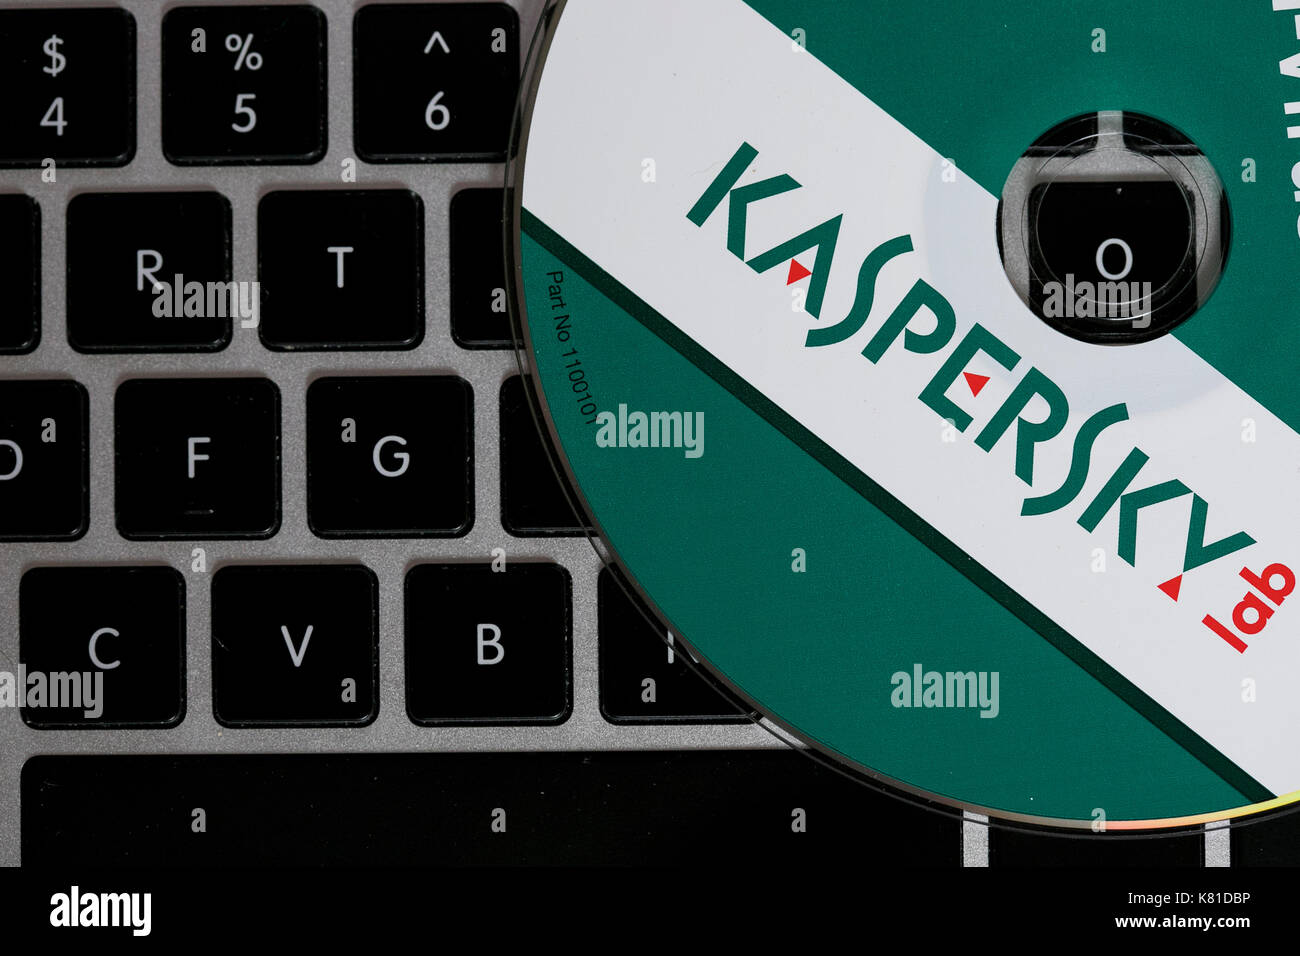 Kaspersky Lab Internet Security and Anti-Virus software products. The Russian software maker has come under scrutiny for it's close ties to the Russia Stock Photo